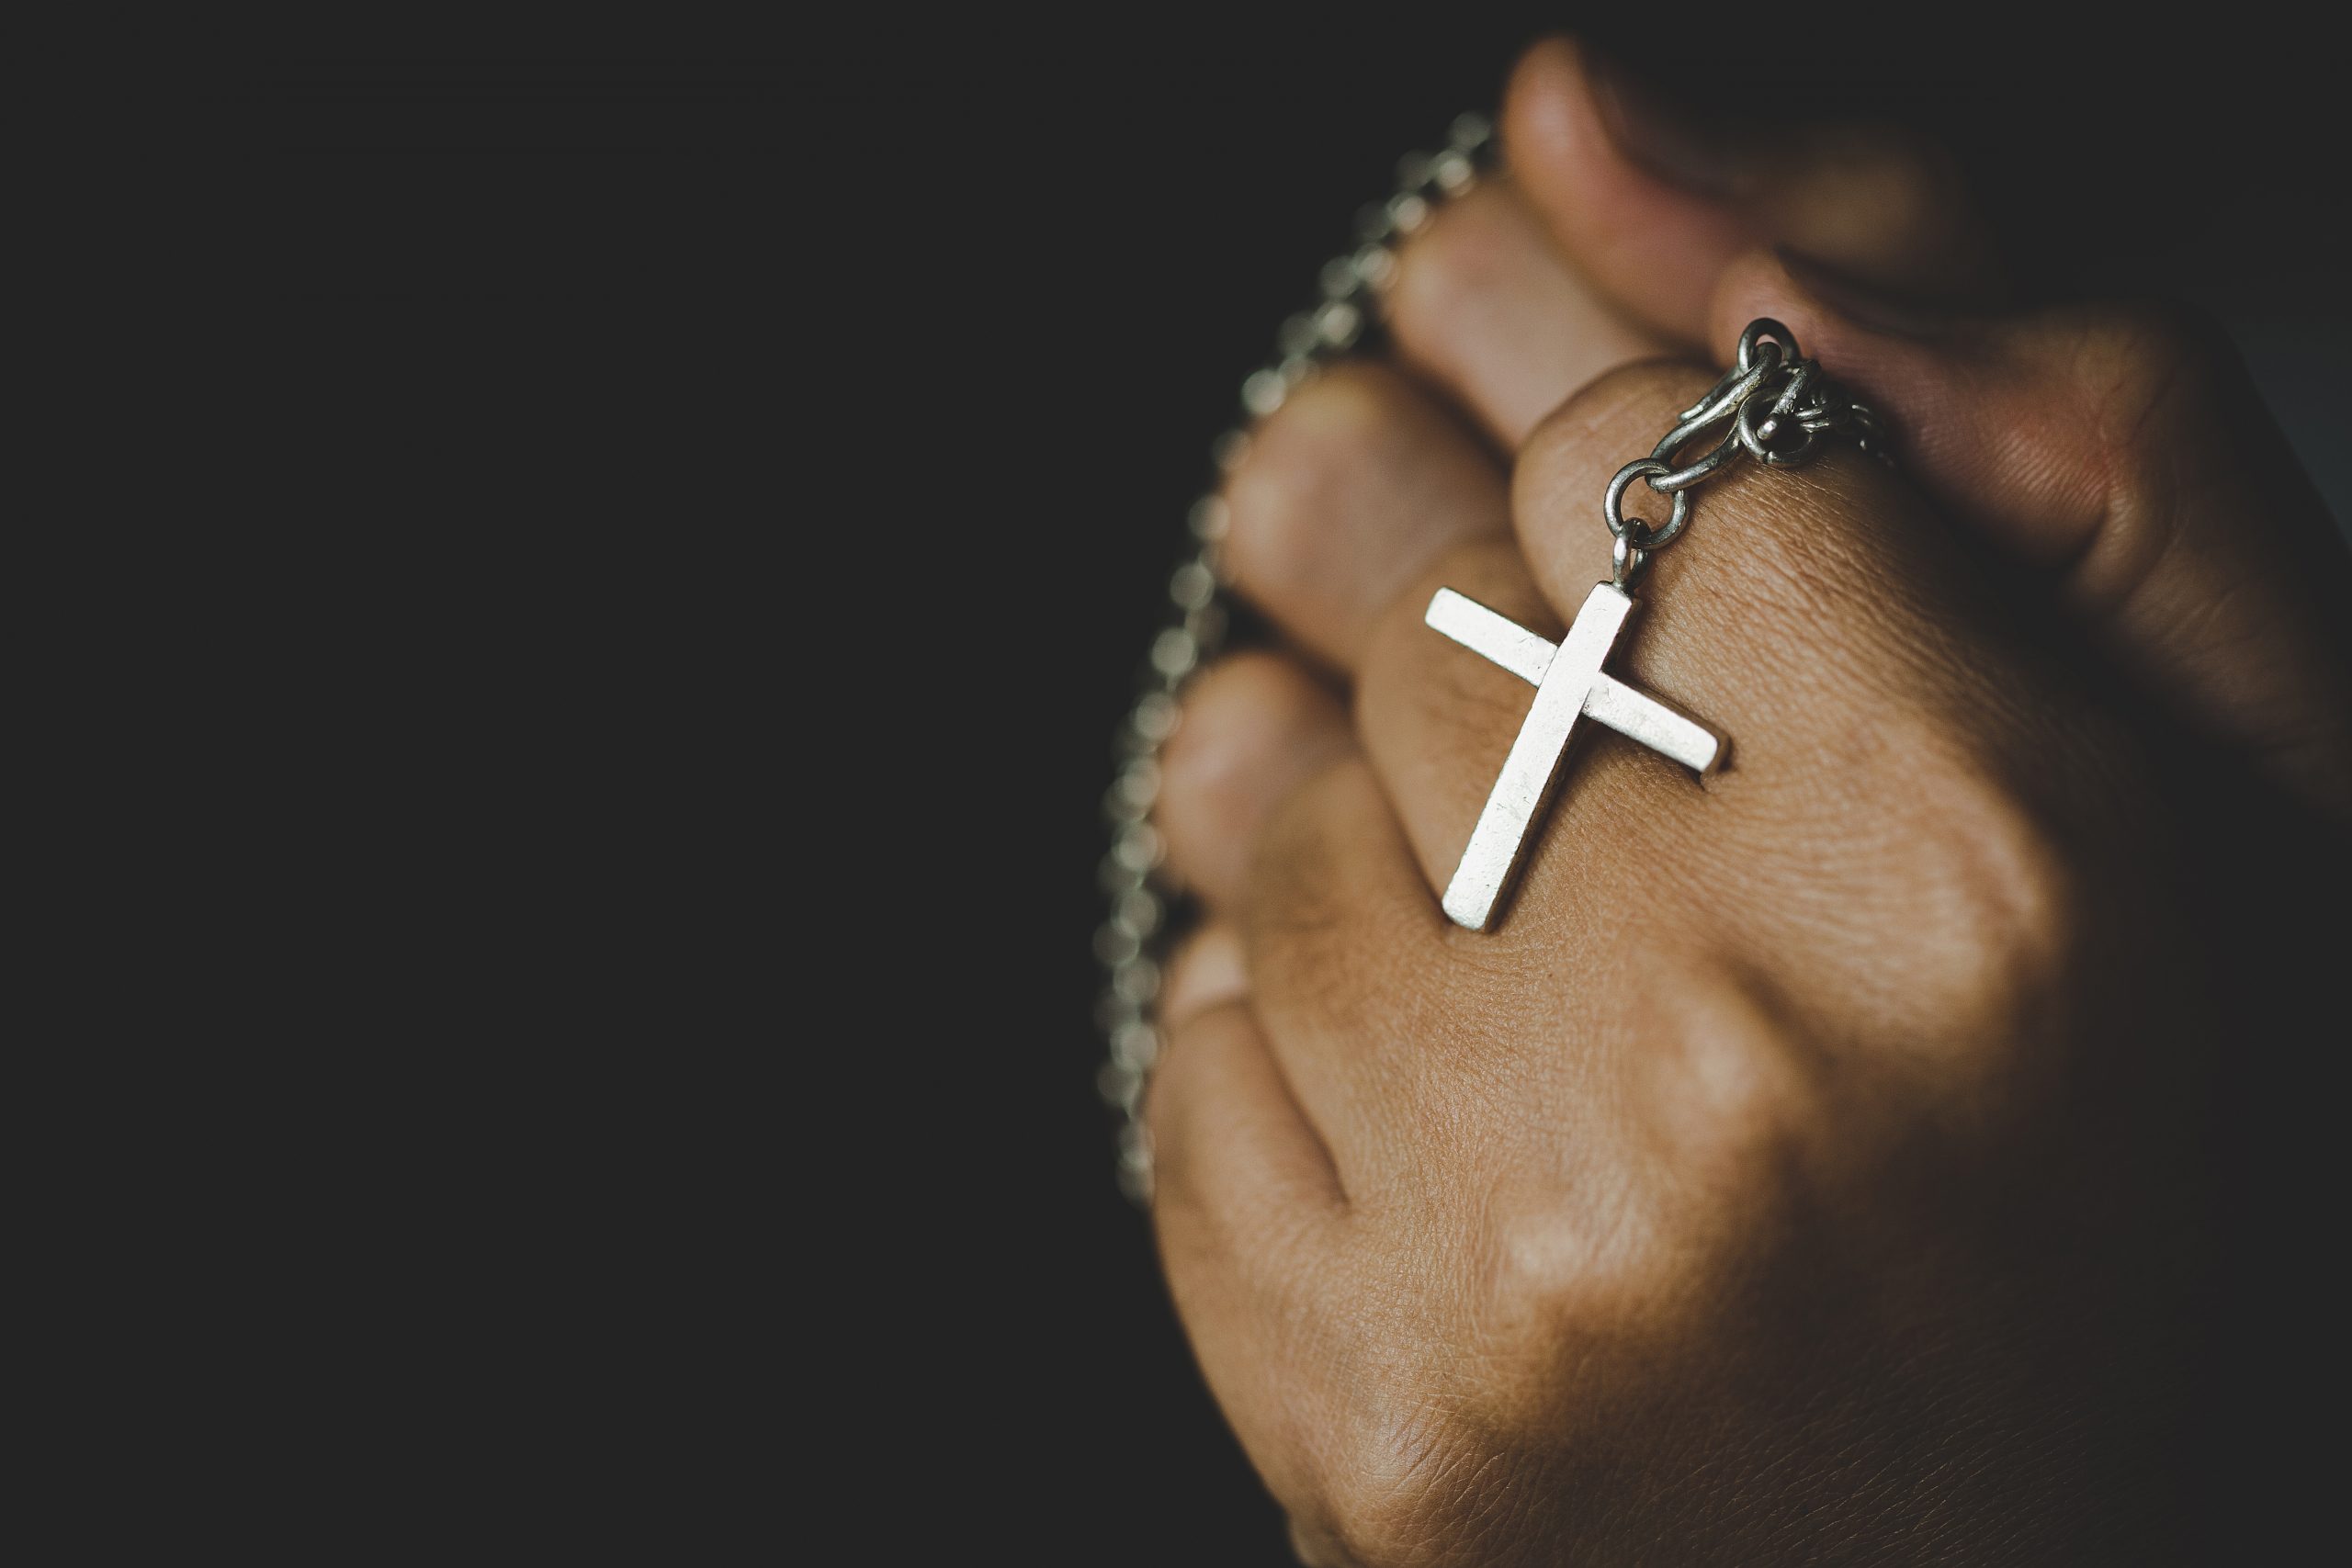 Women in religious concepts Hands praying to God while holding the cross symbol. Nun caught the cross in his hand. The human hand holds the holy cross and pray for God's blessings.